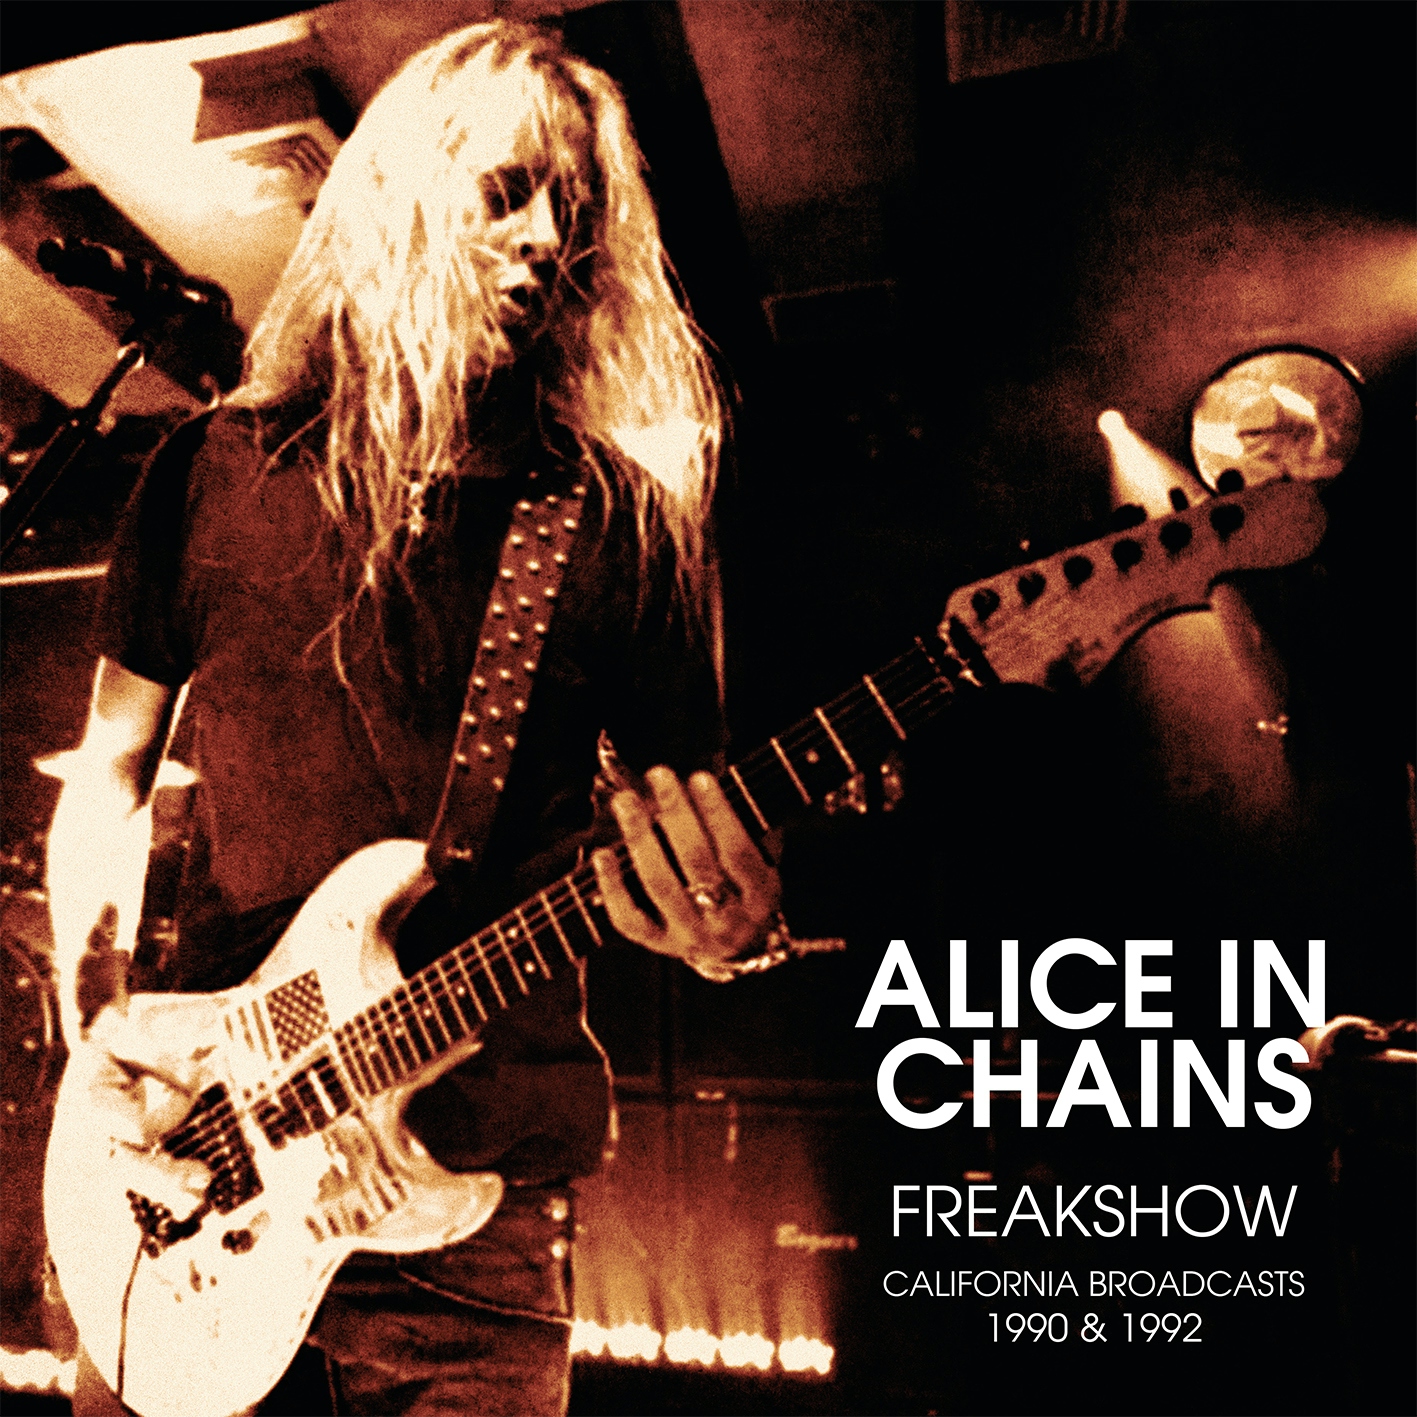 Album artwork for Freak Show by Alice In Chains